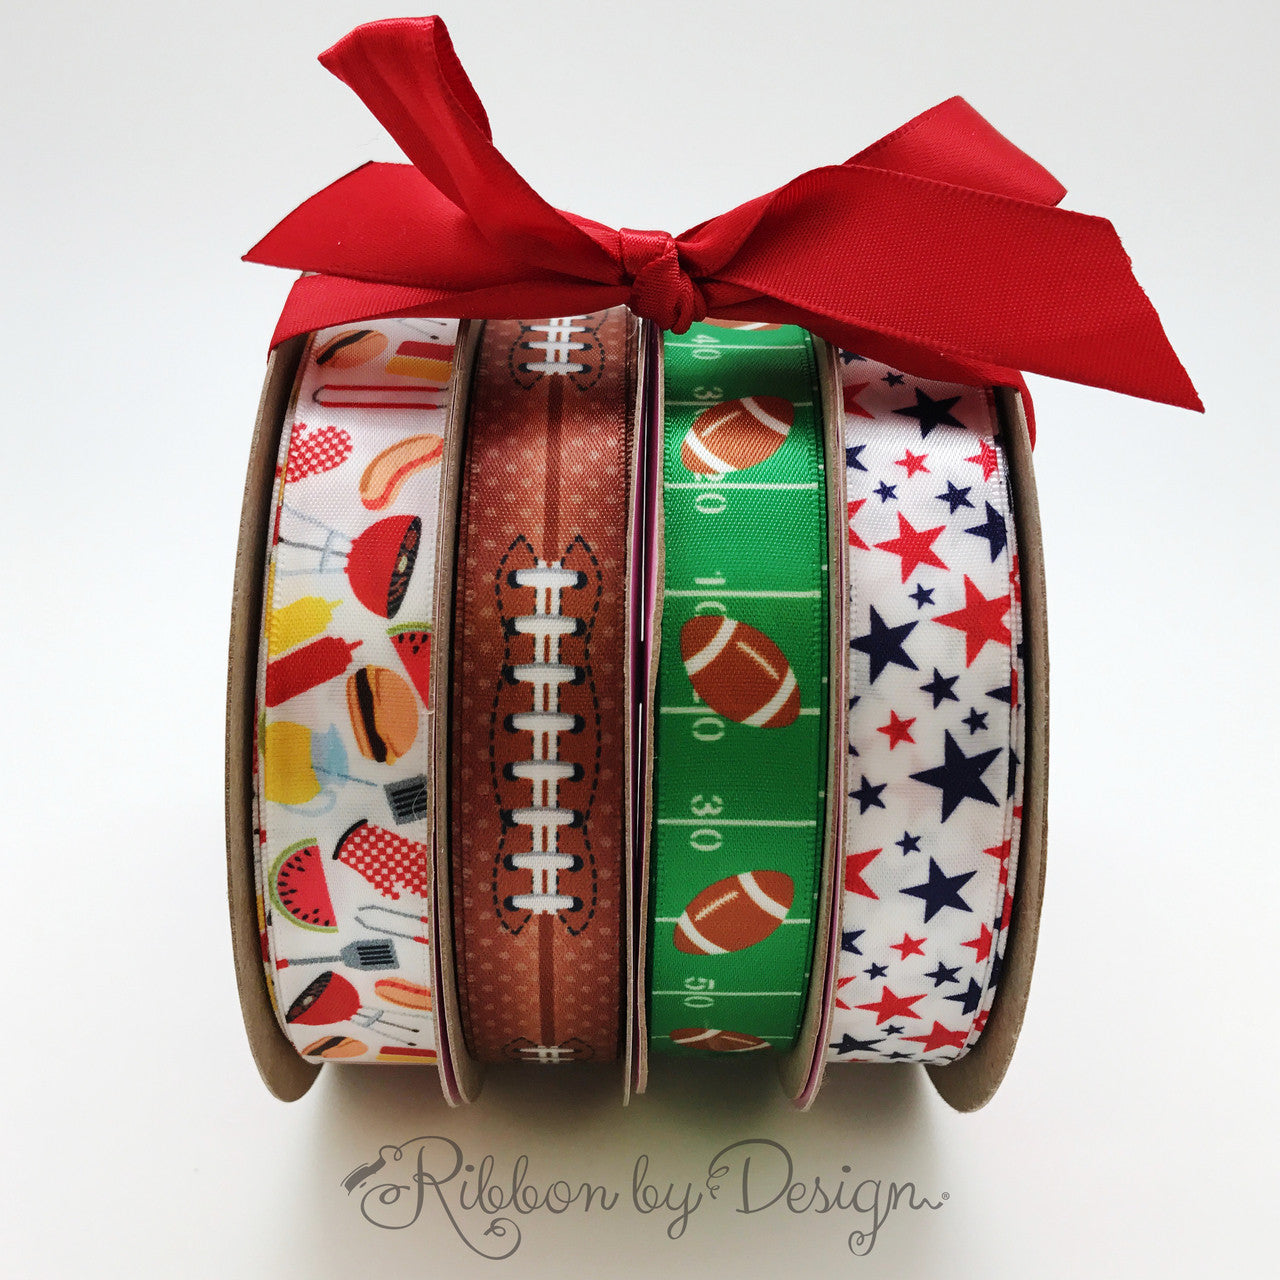 Mix and match our ribbons with barbecue theme or patriotic themes to make tailgating a blast!